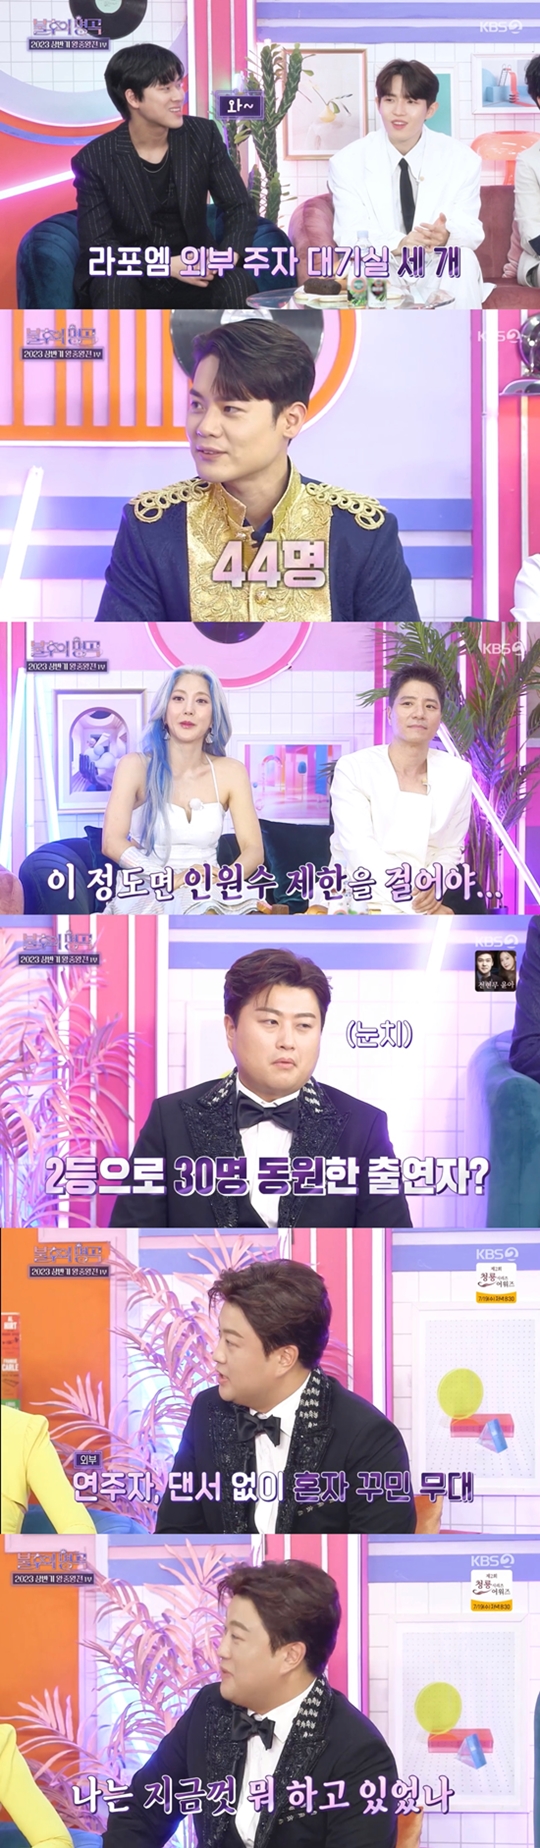 Immortal Songs: Singing the Legend Kim Ho-joong fires up desire to have wang jung wang chen trophyOn the 15th, it was broadcast on the 15th. Singing Songs: Legend was broadcast on the 20th, and it was broadcast on the first half of the year, and it was broadcast on the second half of the year, and it was broadcast on the second half of the year. The King of Middle-earth.Kim Joon-hyun pointed to rapoem, saying, There is a team that has attracted the most outside The Loneliness of the Long Distance Runner.Rapoem was amazed that the Loneliness of the Long Distance Runner alone had 44 people burning the desire for the wang jung wang chen trophy.Outside The Loneliness of the Long Distance Runner In the news that there are only three waiting rooms, the sea laughed and laughed, saying, This should limit the number of people.Lee Chan-won then mentioned Kim Ho-joong, saying, There are some performers who mobilized 30 people.Kim Ho-joong said, In fact, every time I came to Immortal Songs: Singing the Legend, I was almost alone without The Loneliness of the Long Distance Runner or dancer. Last time, I saw Jung Sun-ah, I thought, What have I been doing?I have a lot of friends.I thought Id be checked if I called too many people, so I only called about 30 people because I wanted to come in second, he said. To be honest, I called 33 people.Following the large-scale exterior The Loneliness of the Long Distance Runner, Kim Ho-joong said he had prepared the props steadily. I took the trophy in the last appearance, but I needed an idea to increase the odds this time.So I made my own big flags. When I heard this, the sea sparkled, Do you give me Flags after the stage? Kim Ho-joong said, I have to use it at my concert.The long-awaited wang jung wang chen The first stage was decorated by Kim Jae-hwan.Kim Jae-hwan, who appeared dancing at the time of introducing the cast, said, I was excited to dance because there were a lot of fans, but now that I think about it, it was too cheeky. So I think it was number one.On this day, Kim Jae-hwan selected Yunhas Password 486. Kim Jae-hwan said, I used an electric guitar.I want to show the band version of Br ⁇ no Massu Engira Masilamani, but It is too burdensome to keep mentioning Br ⁇ no Massu Engira Masilamani. However, Kim Joon-hyun said, Br ⁇ no Massu Engira Masilamani is fine because I can not watch the broadcast.Kim Jae-hwan cheered the crowd with an overwhelming Stage reminiscent of a youth rock star.Photo: KBS 2TV broadcast screen